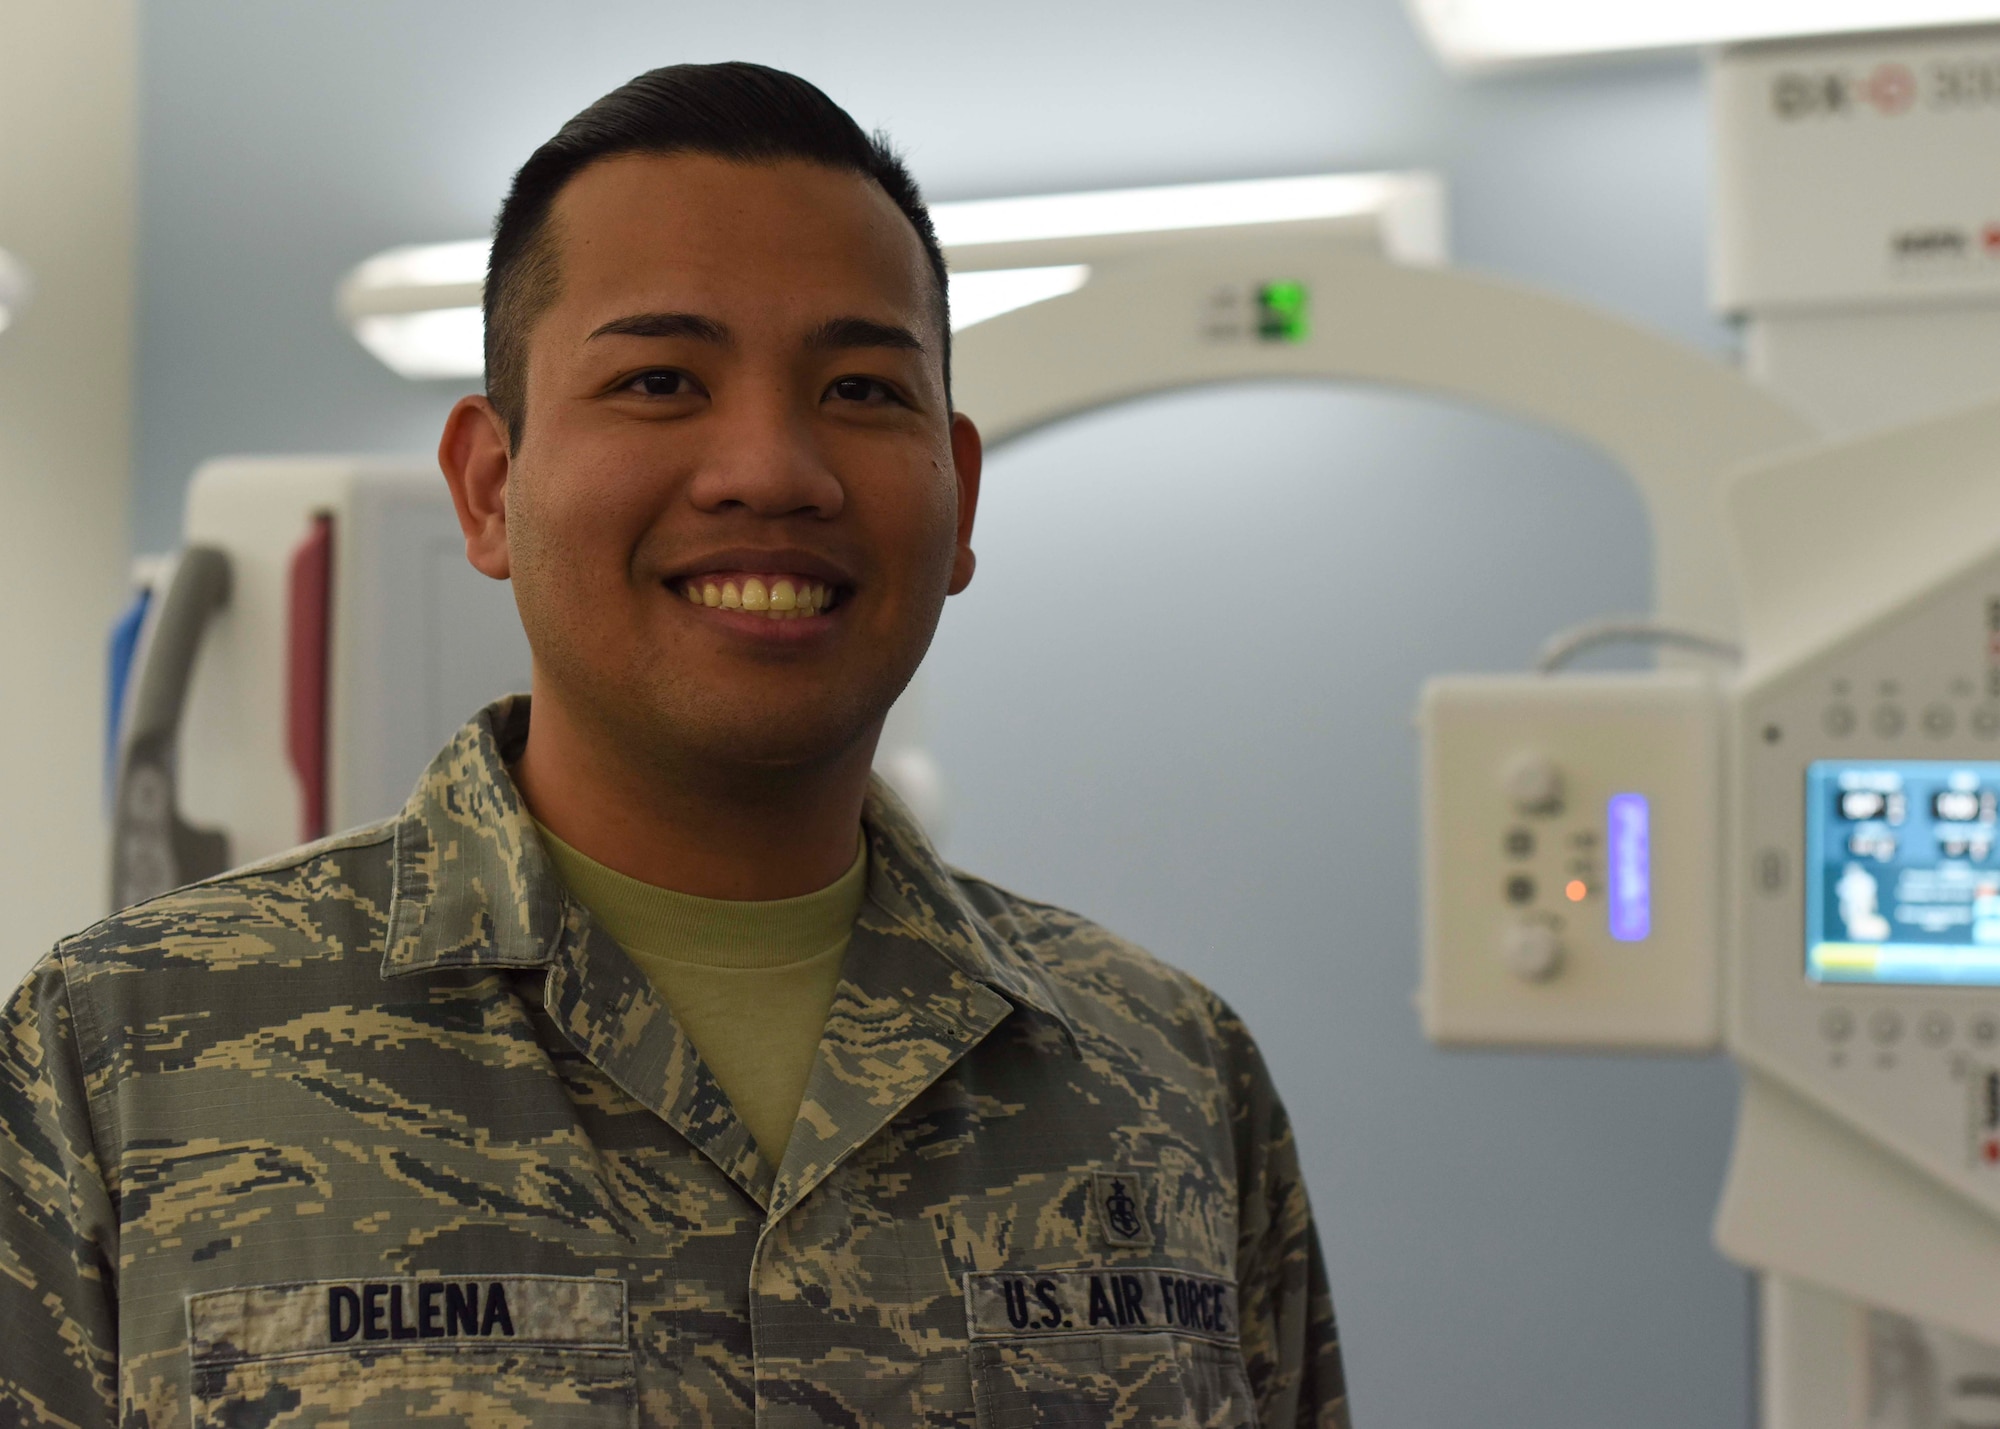 Staff Sgt. Englebert Delena, 49th Medical Group diagnostic imaging technologist, poses in front of a direct capture x-ray machine, Jan. 23, 2019, on Holloman Air Force Base, N.M. Delena is one of three diagnostic imaging technologists in the Radiology Clinic, who assists up to 2,000 patients annually. (U.S. Air Force photo by Staff Sgt. BreeAnn Sachs)